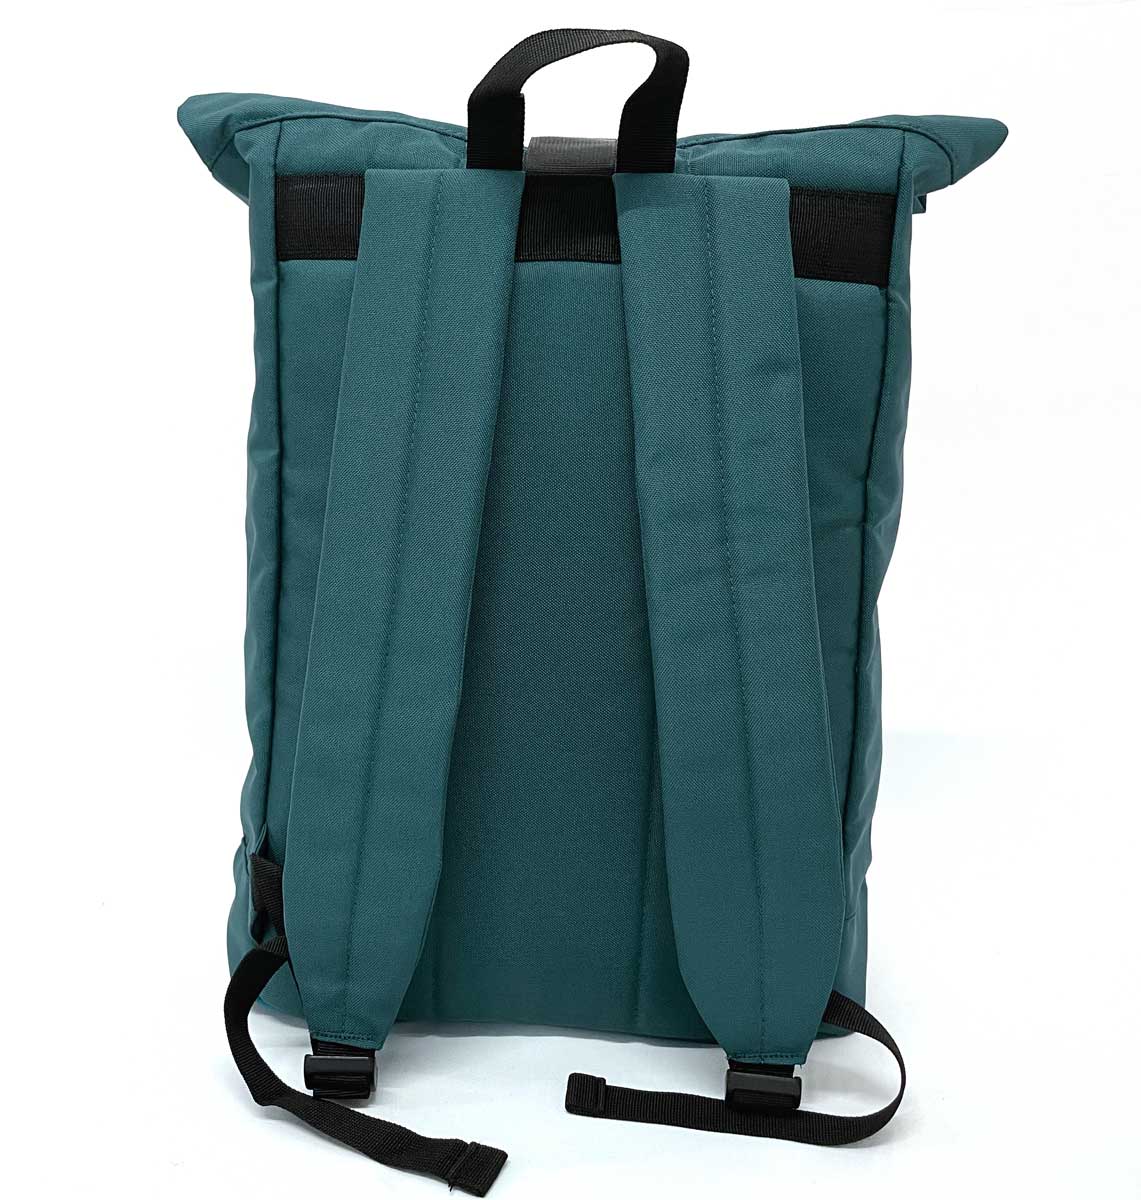 Highland Cow Beach Roll-top Recycled Backpack - Blue Panda